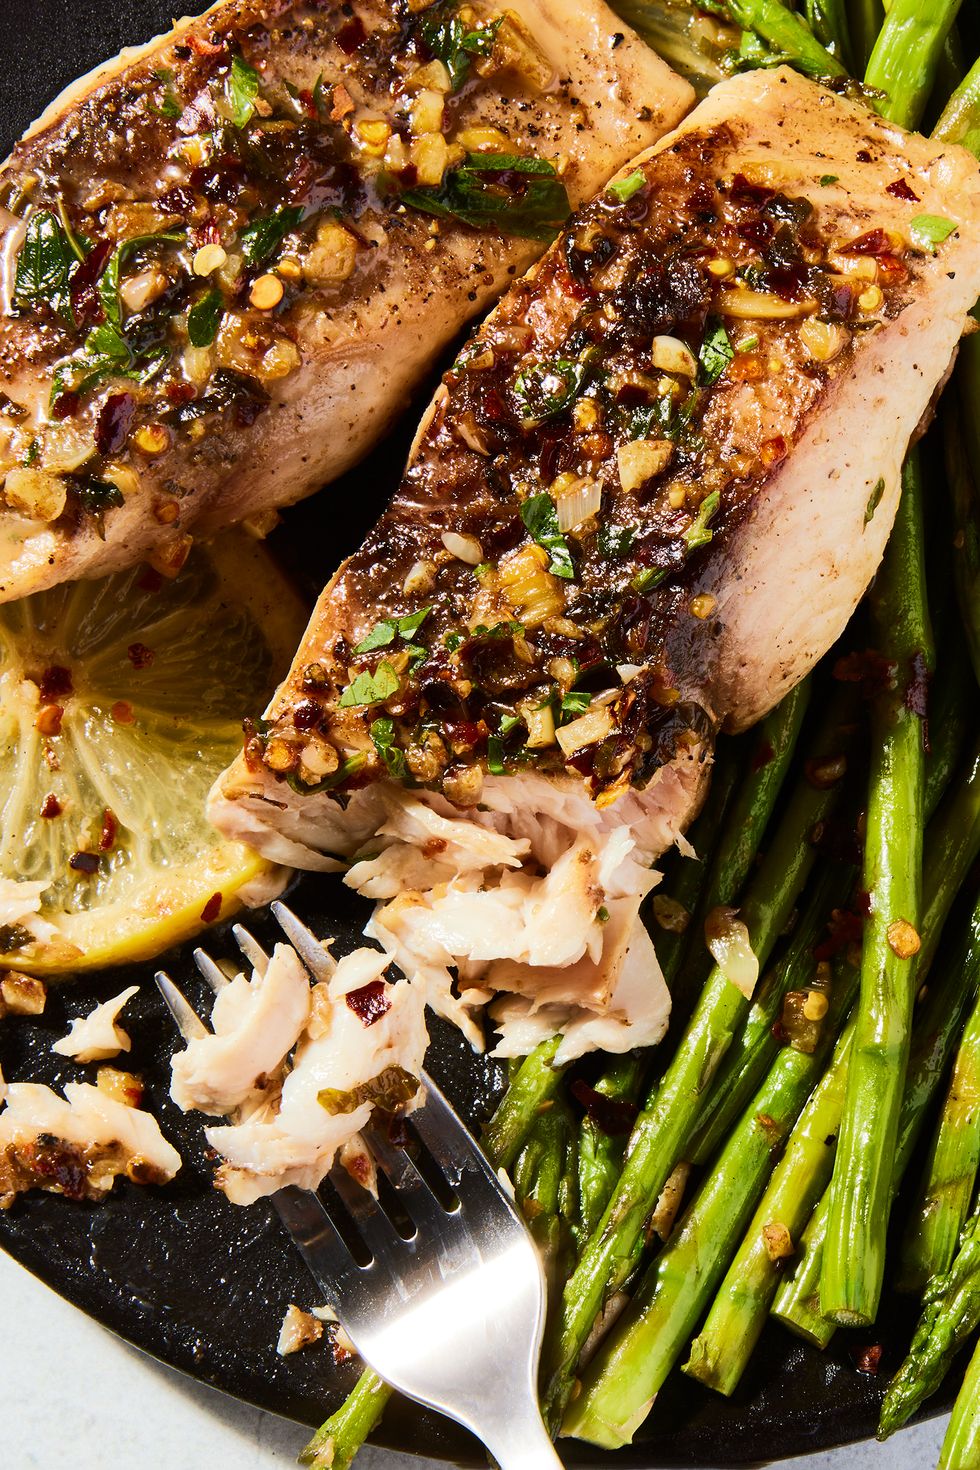 Easy Healthy Dinners For Two - Romantic Healthy Date Night Recipes